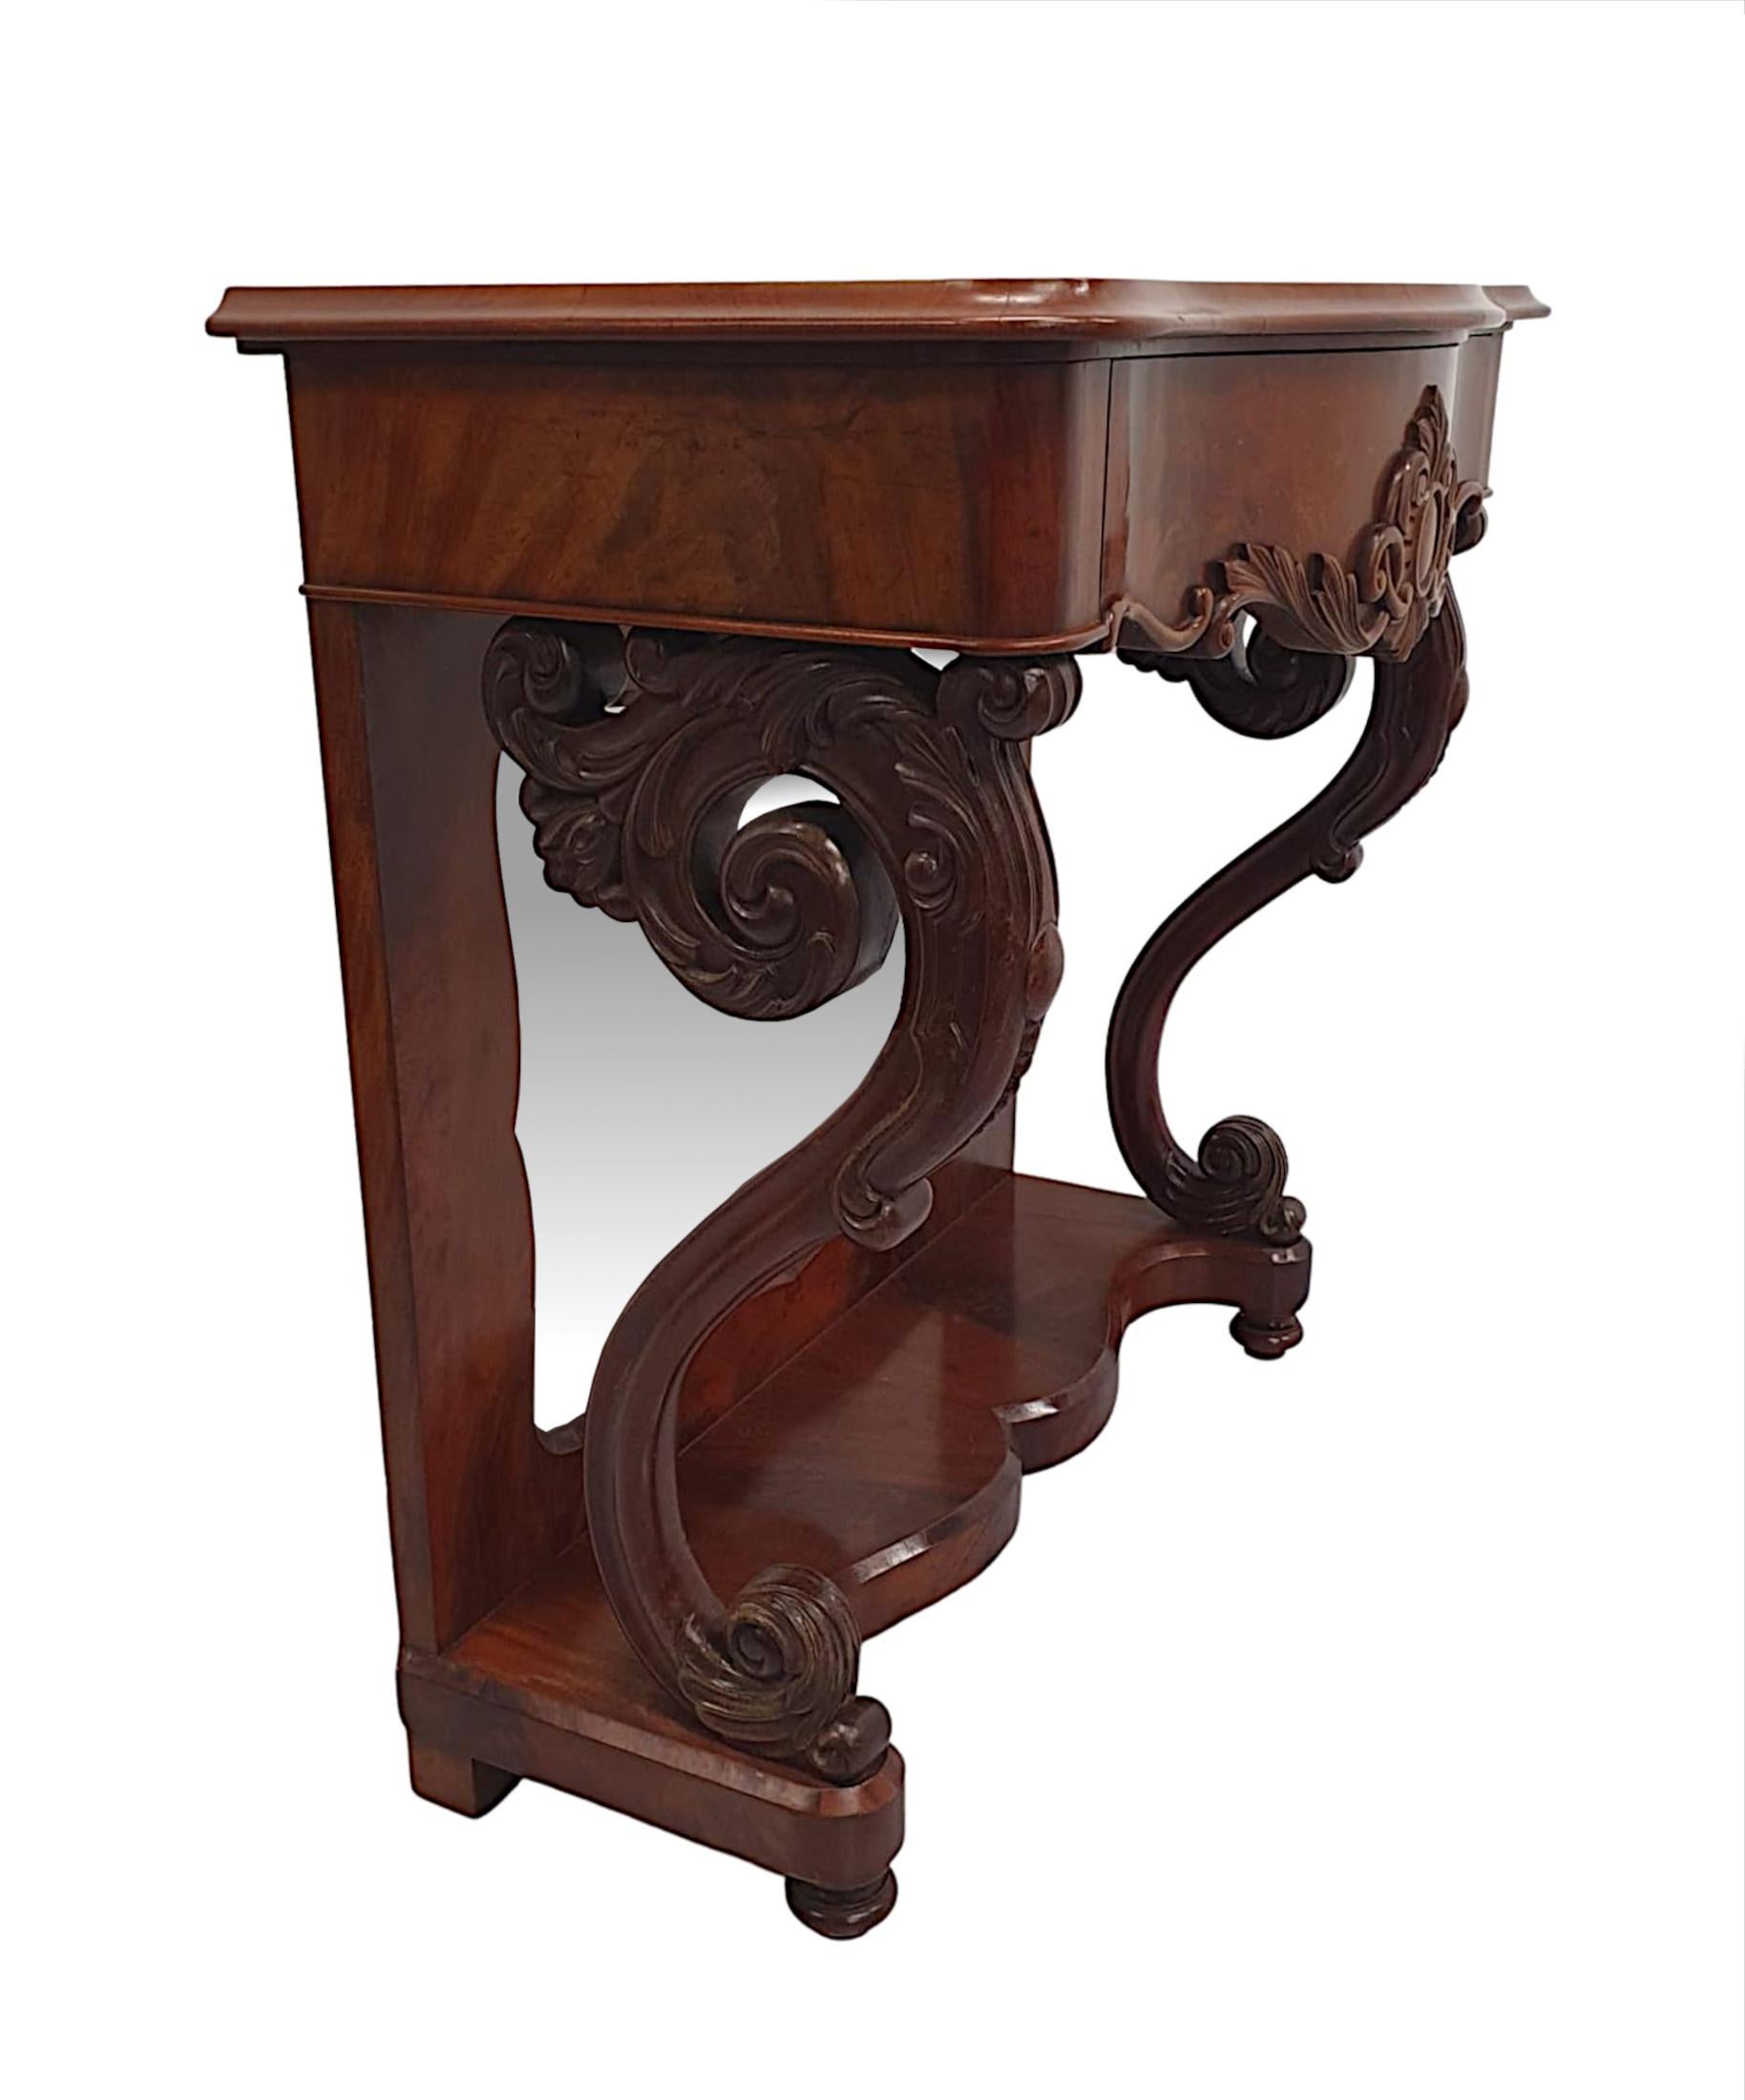 A very fine 19th Century flame mahogany mirror back console table, of gorgeous quality and finely hand carved with beautifully rich patination and grain.  The moulded serpentine top of rectangular form is raised over an elegantly simple single